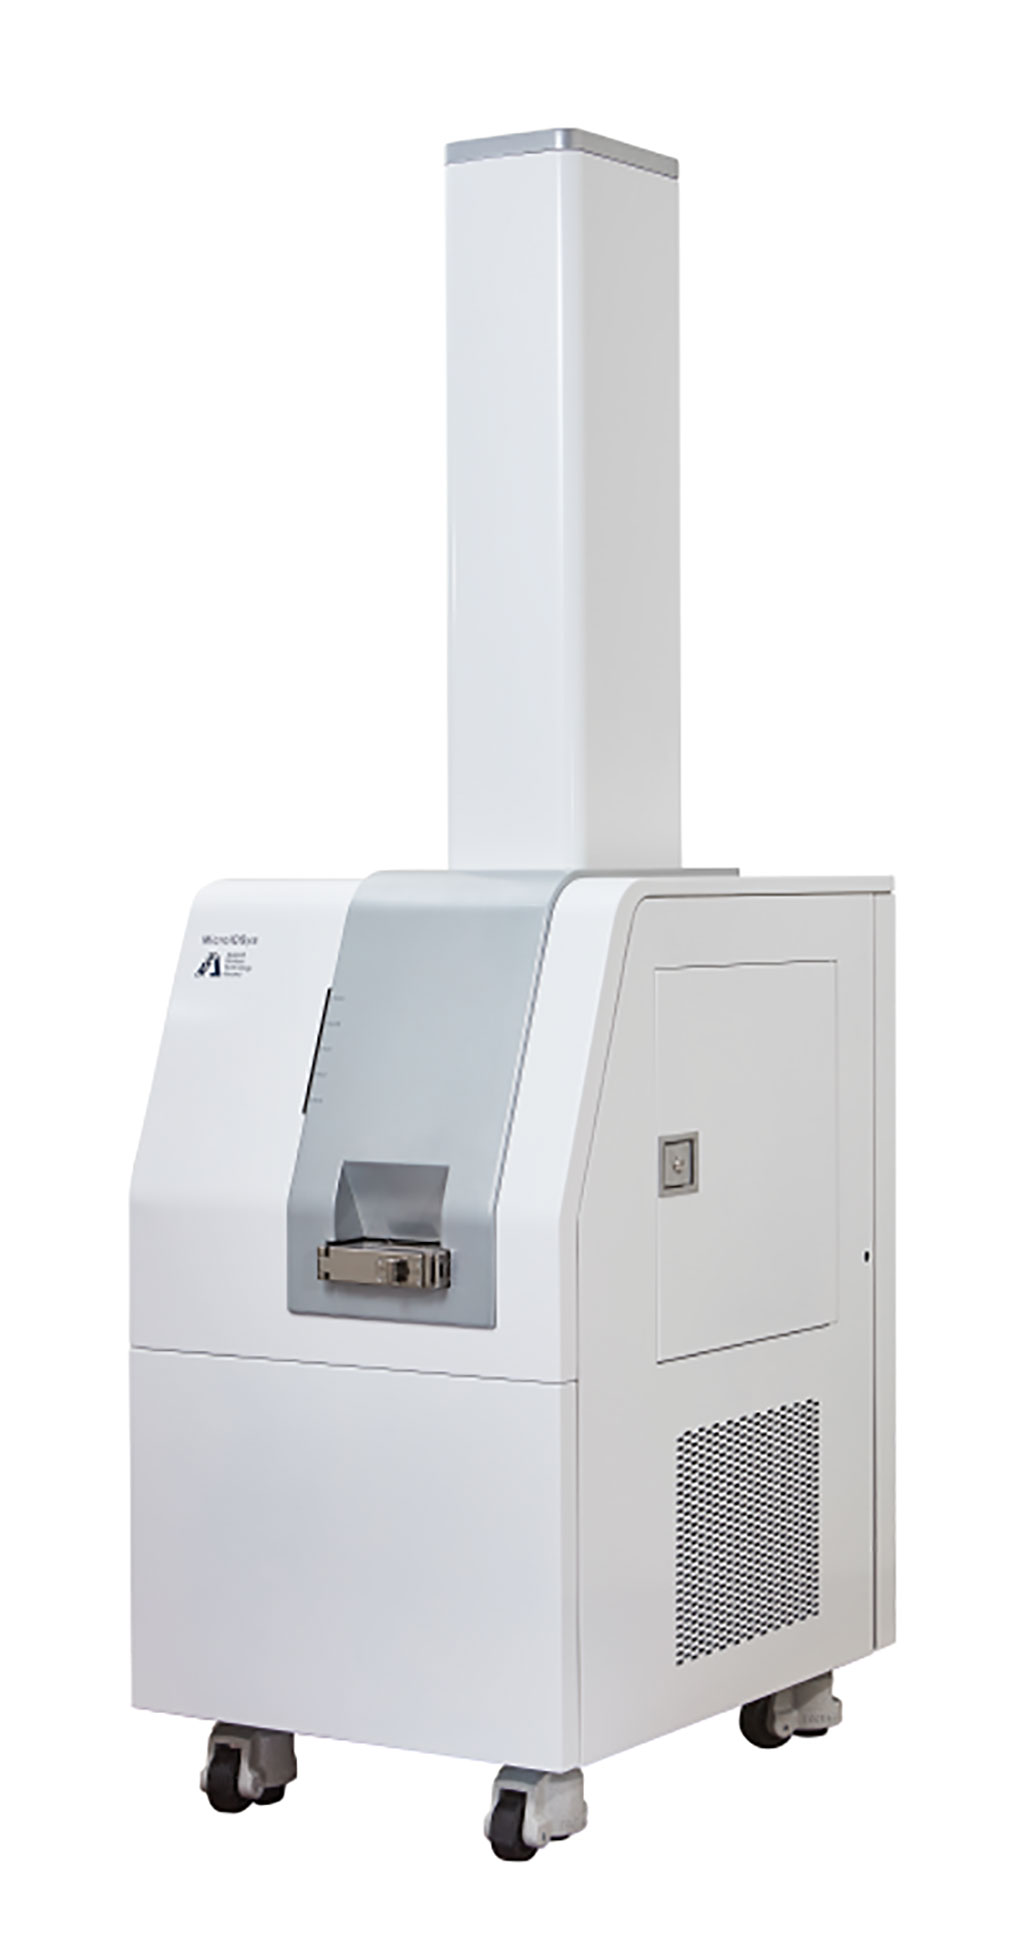 Image: The MicroIDSys Matrix-assisted laser desorption/ionization time-of-flight mass spectrometry (MALDI-TOF MS) system (Photo courtesy of ASTA Corp)